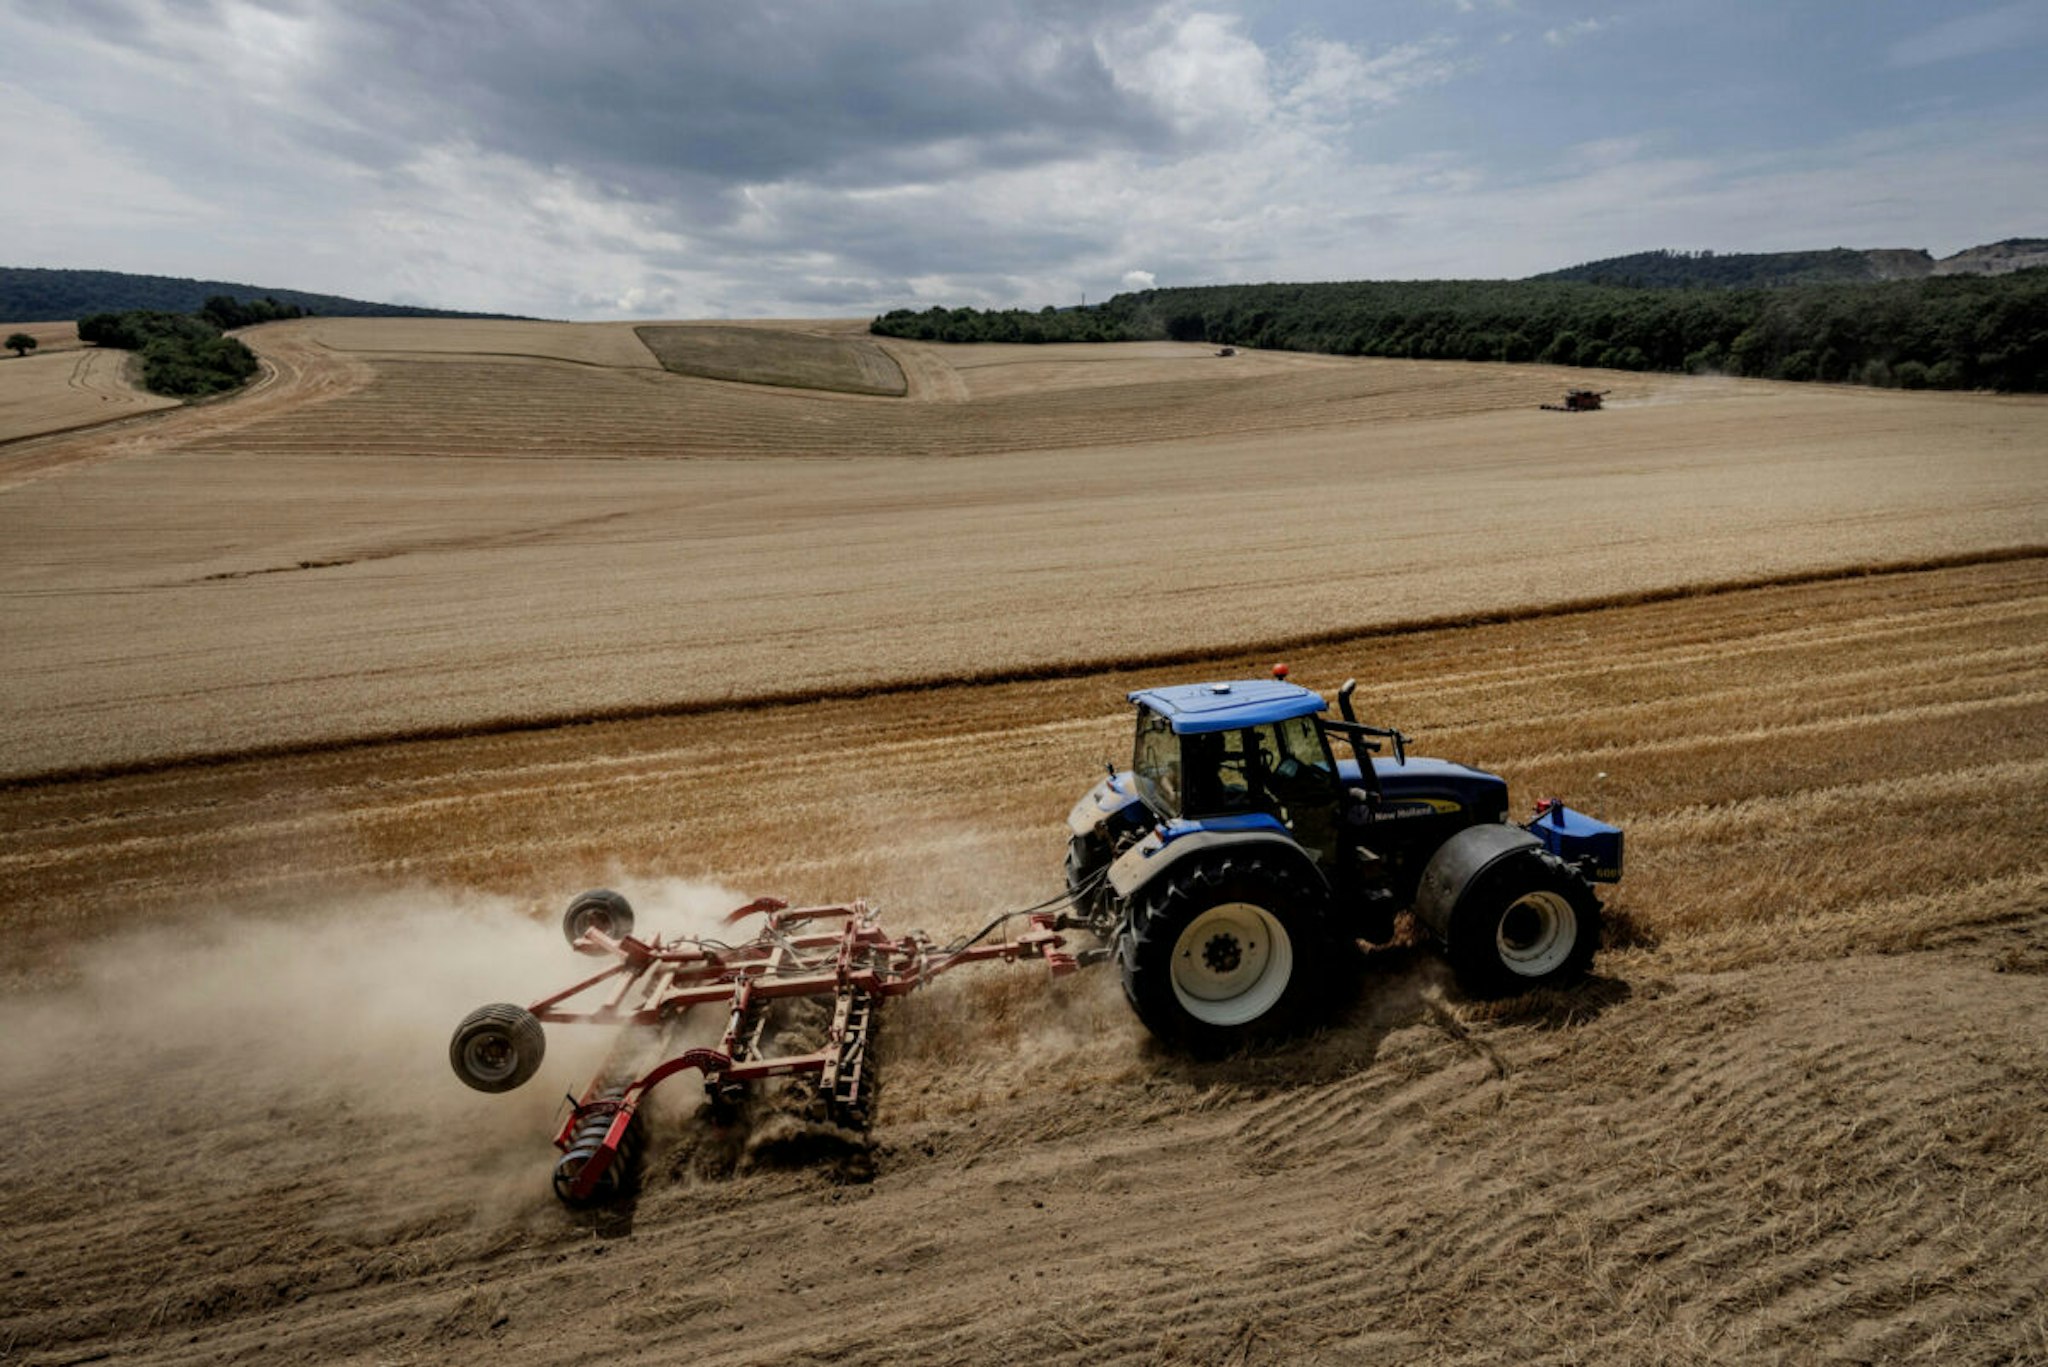 PUSZTAMAROT, HUNGARY - JULY 07: A tractor plows the ground at the end of wheat harvesting on July 7, 2022 in Pusztamarot, Hungary. Hungary recently banned grain exports amid surging global wheat prices, caused by Russia's invasion of Ukraine. Russia and Ukraine are among the world's two largest wheat exporters.